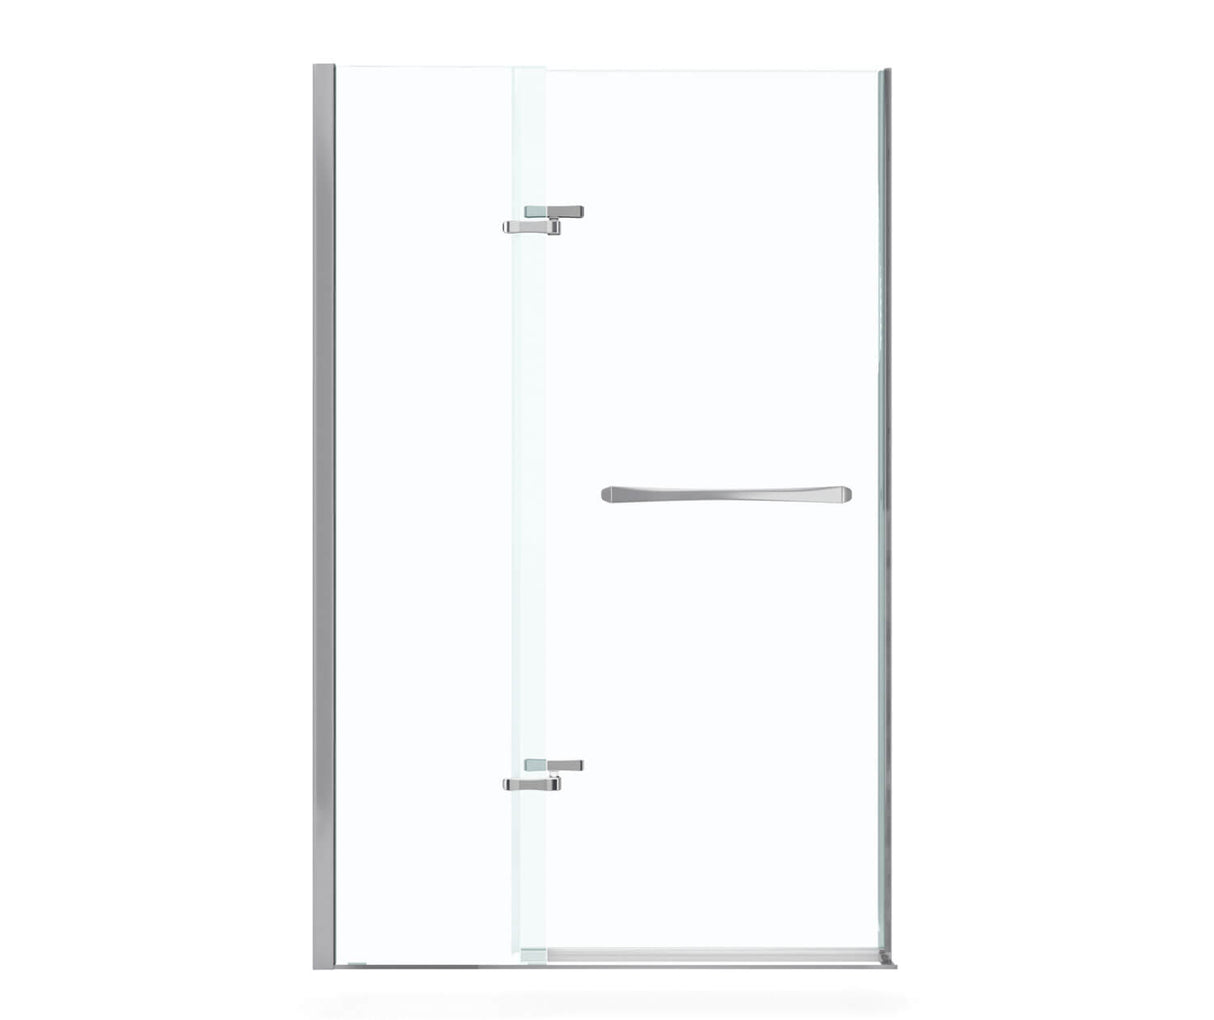 MAAX 136677-900-084-000 Reveal 71 41 ½-44 ½ x 71 ½ in. 8mm Pivot Shower Door for Alcove Installation with Clear glass in Chrome